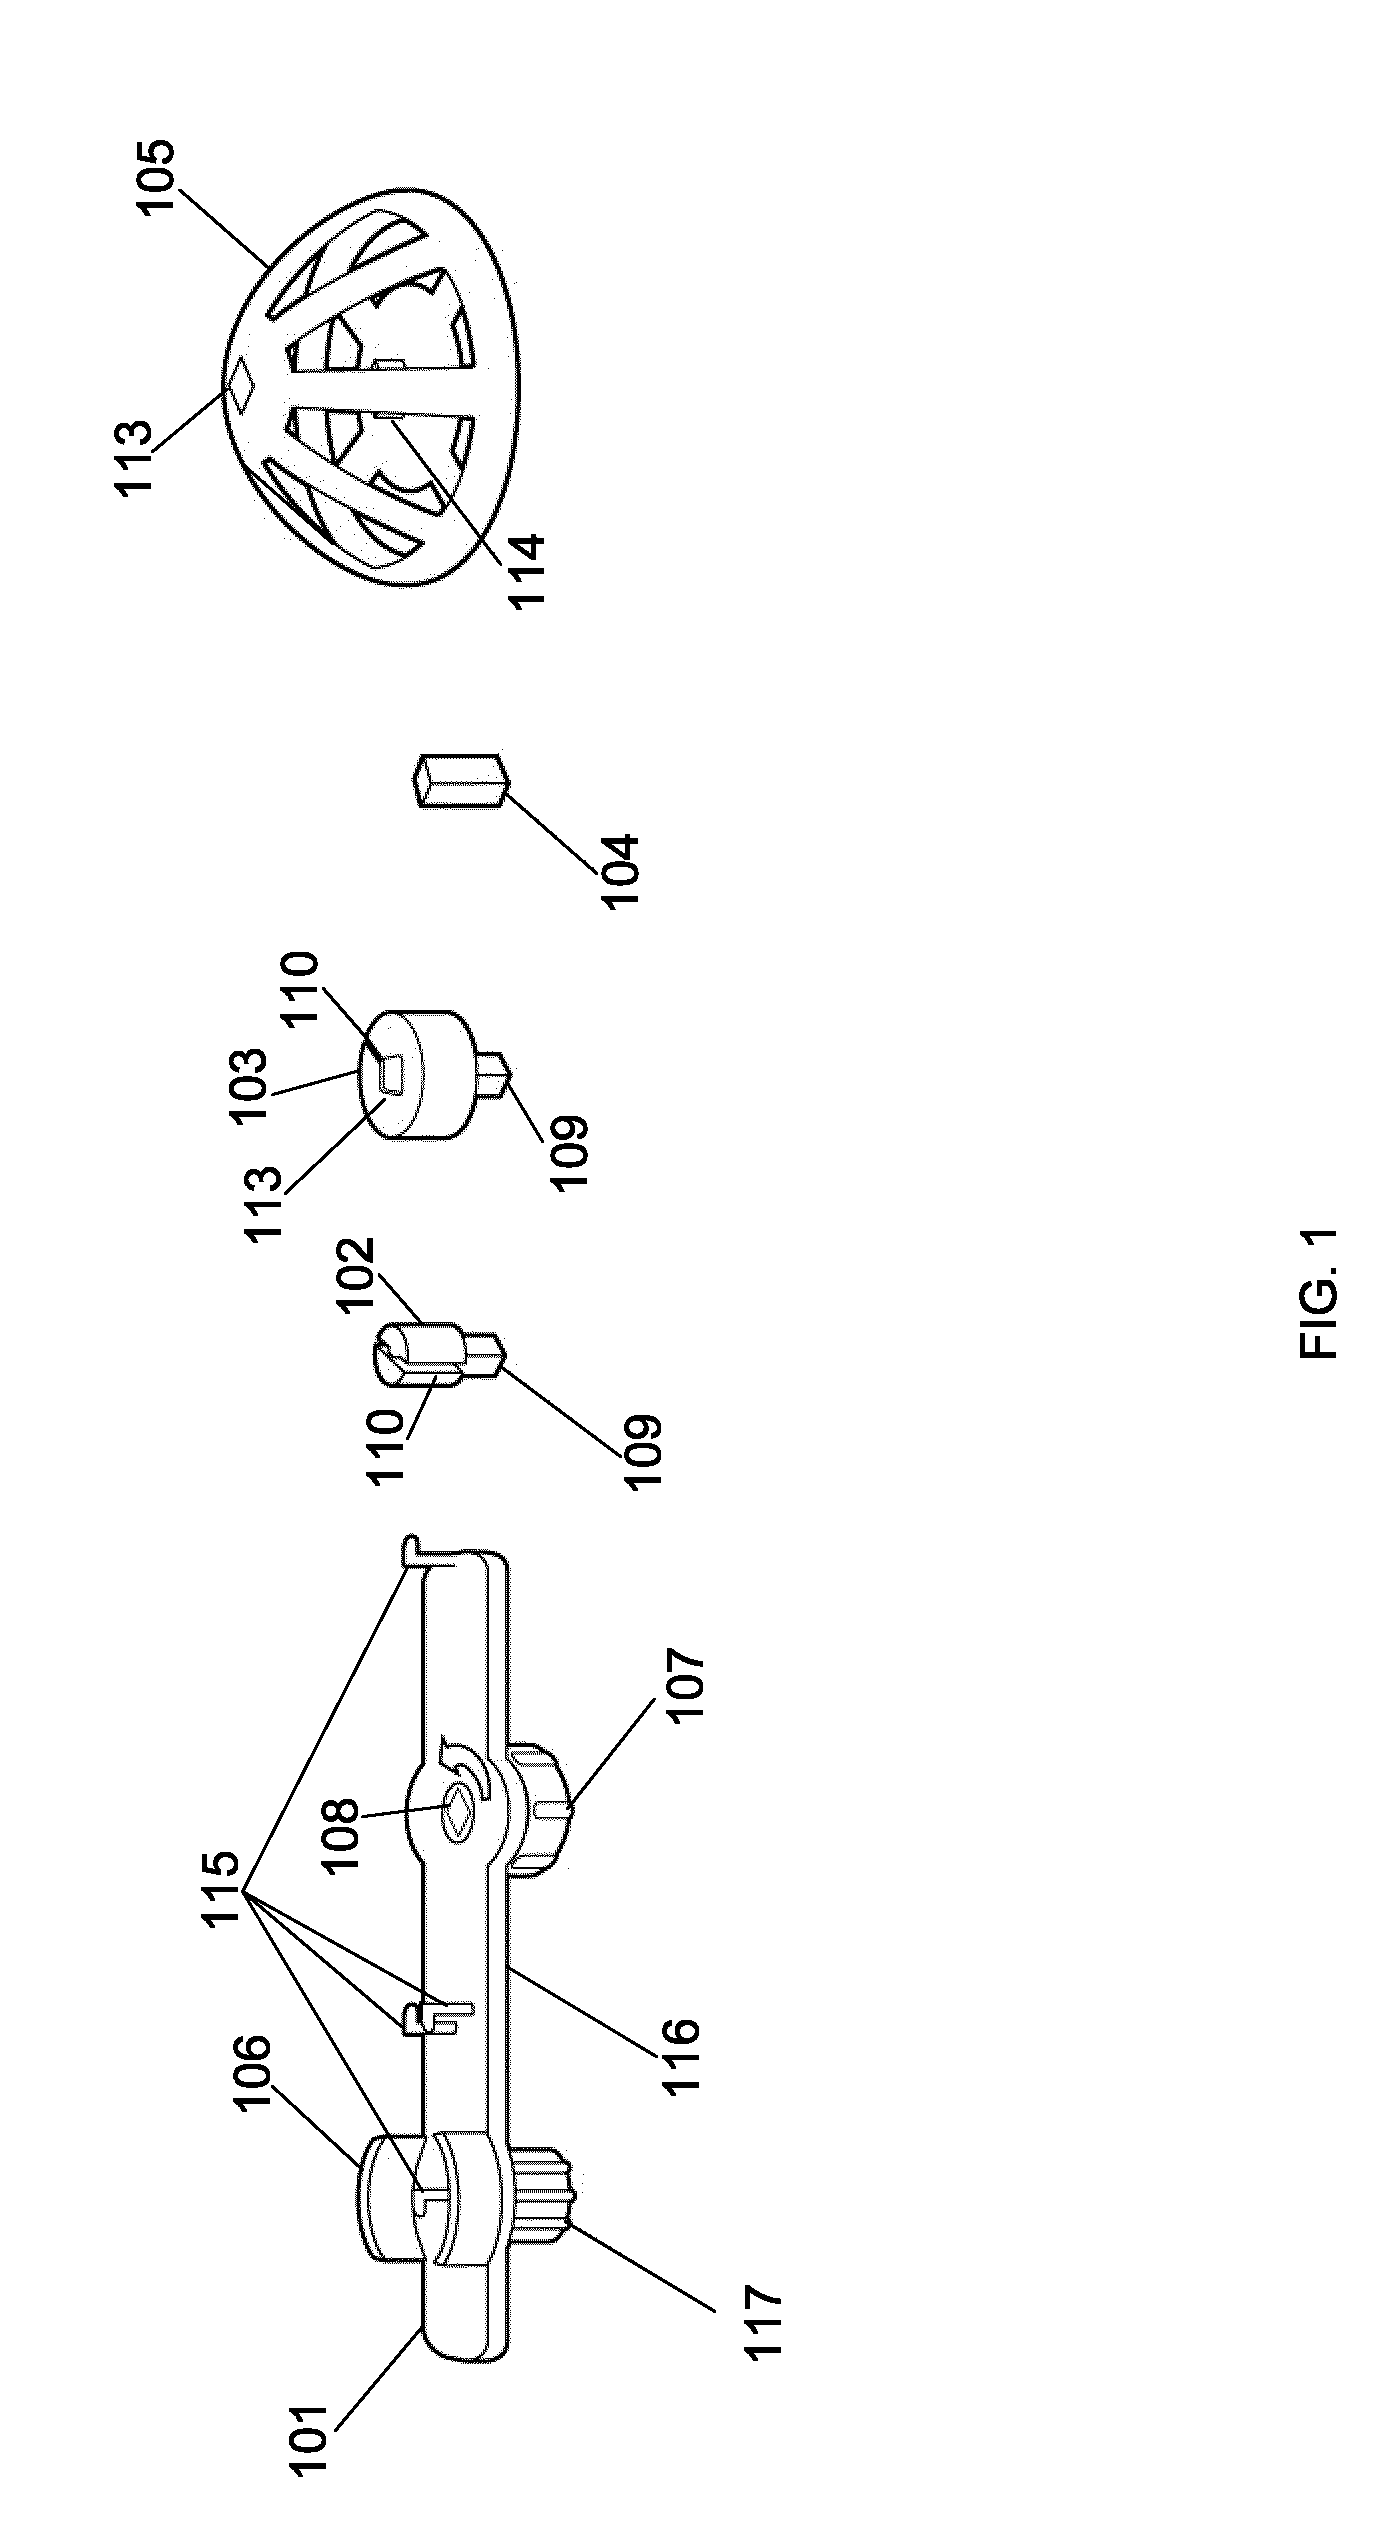 Method and apparatus for creating and connecting paper shapes with quilled paper